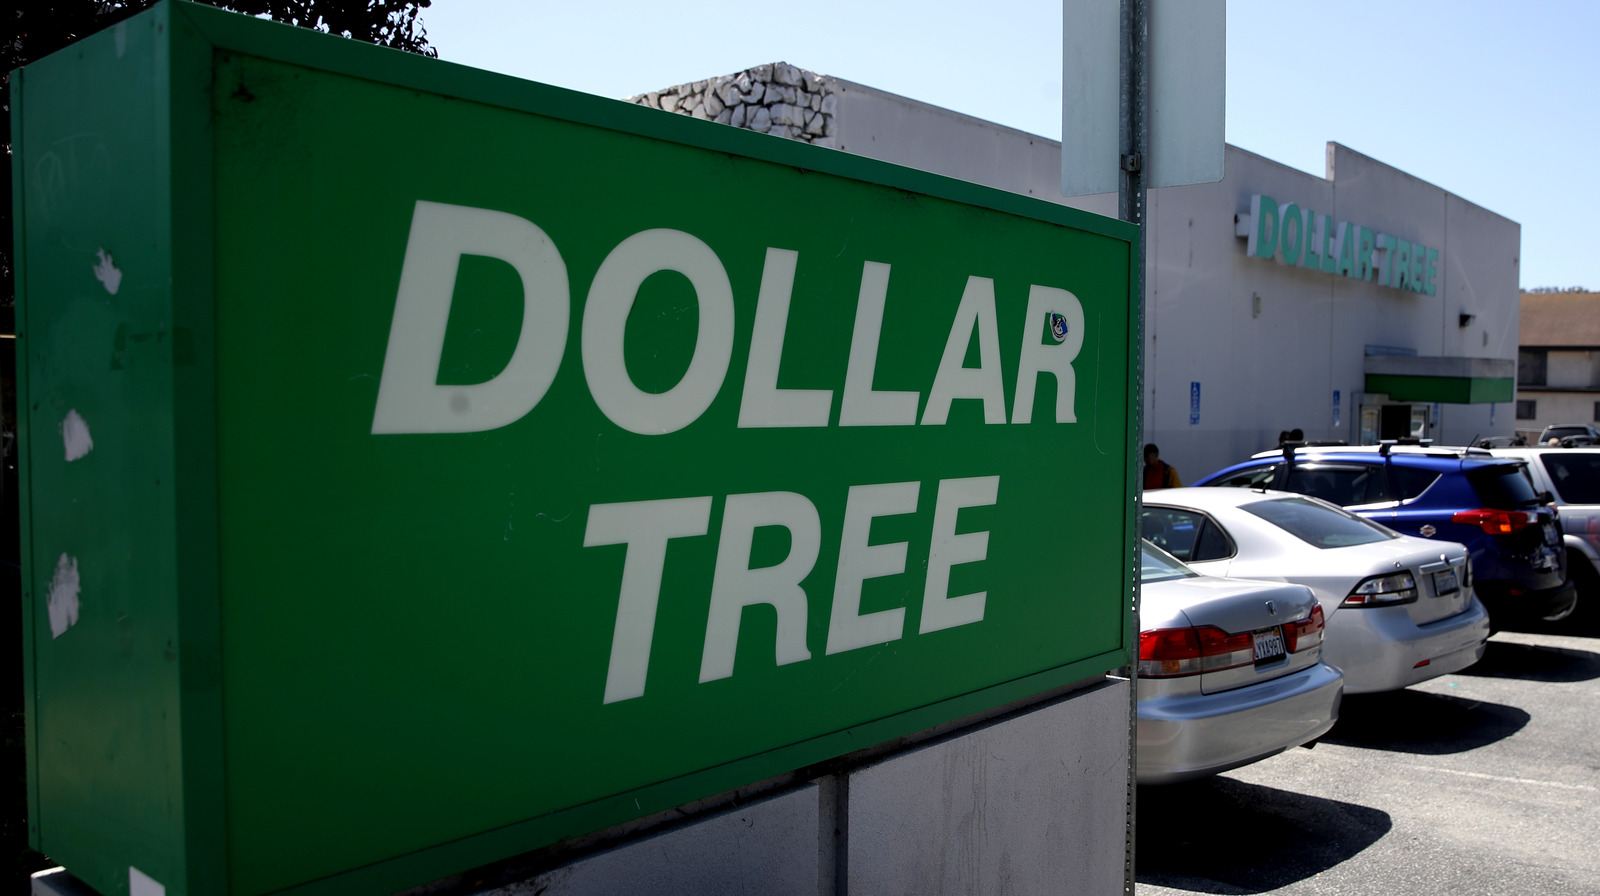 Always Buy These 11 Grocery Items at Dollar Tree